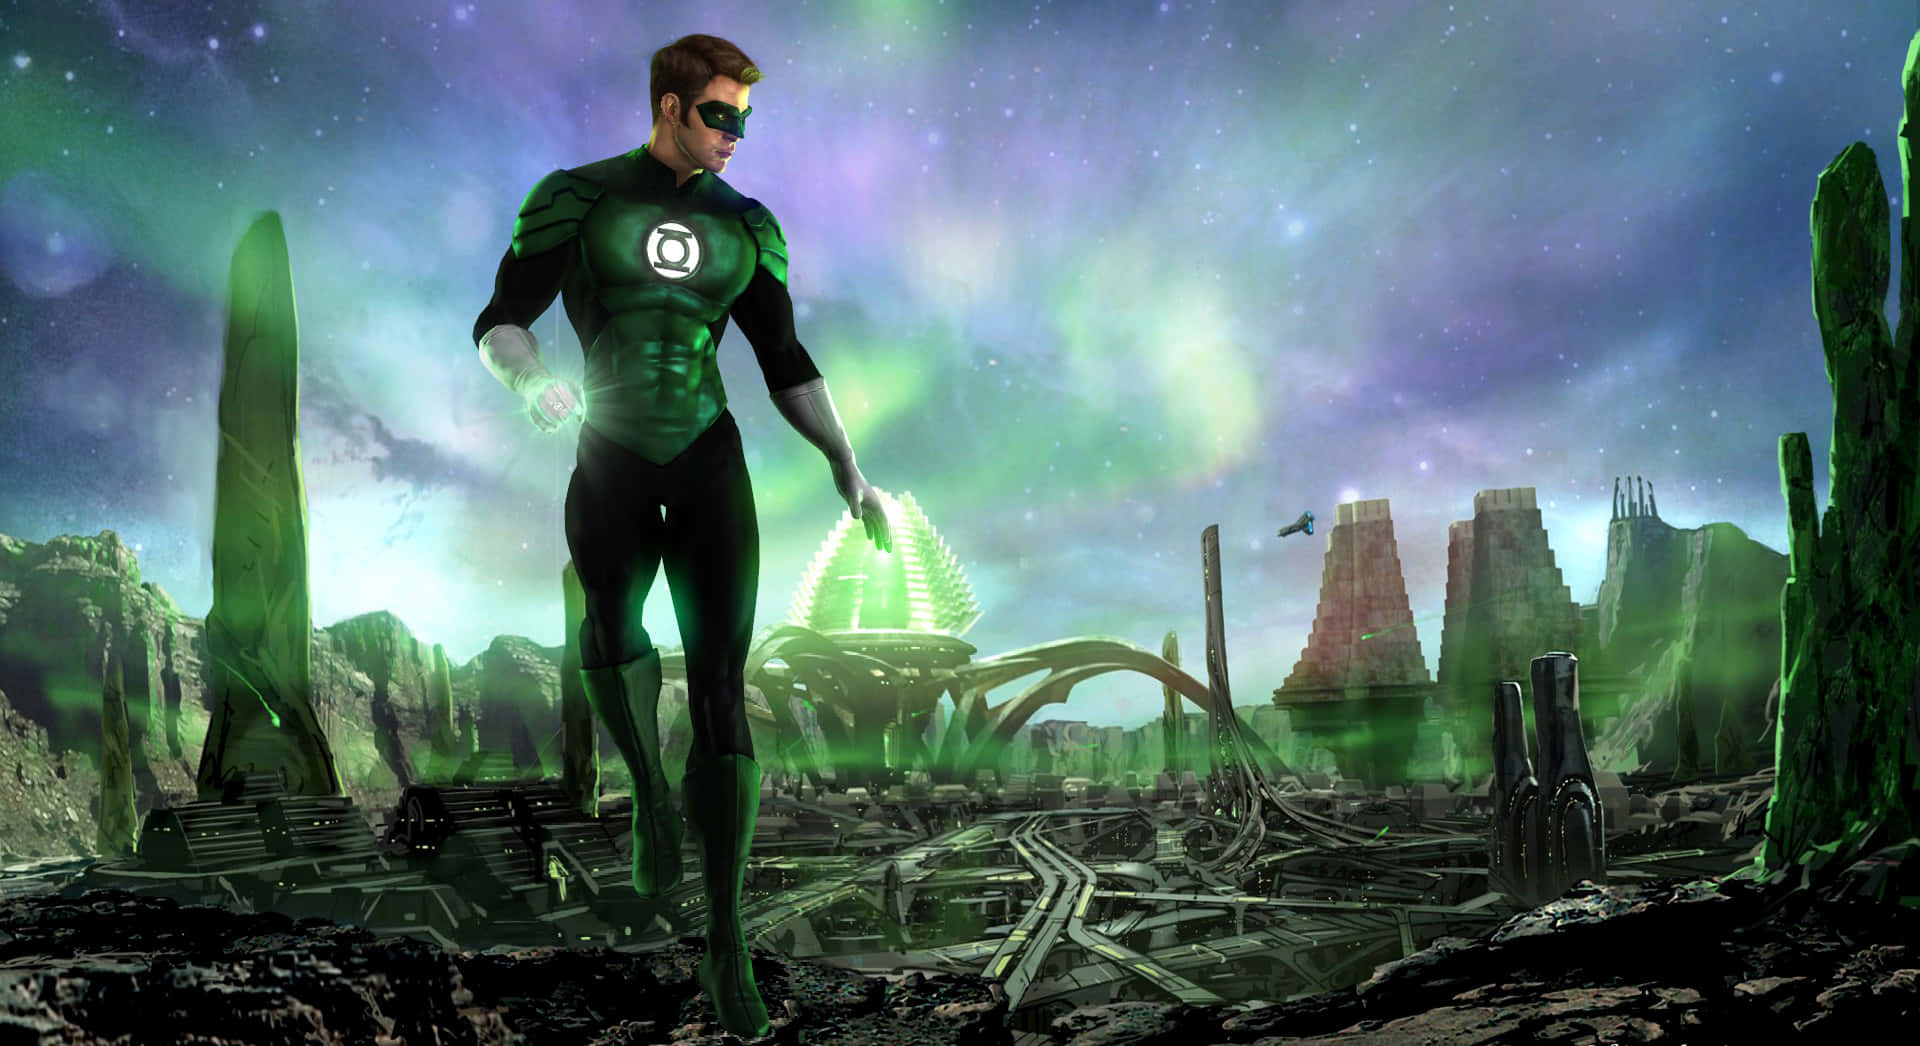 "Join the Green Lantern Corps"